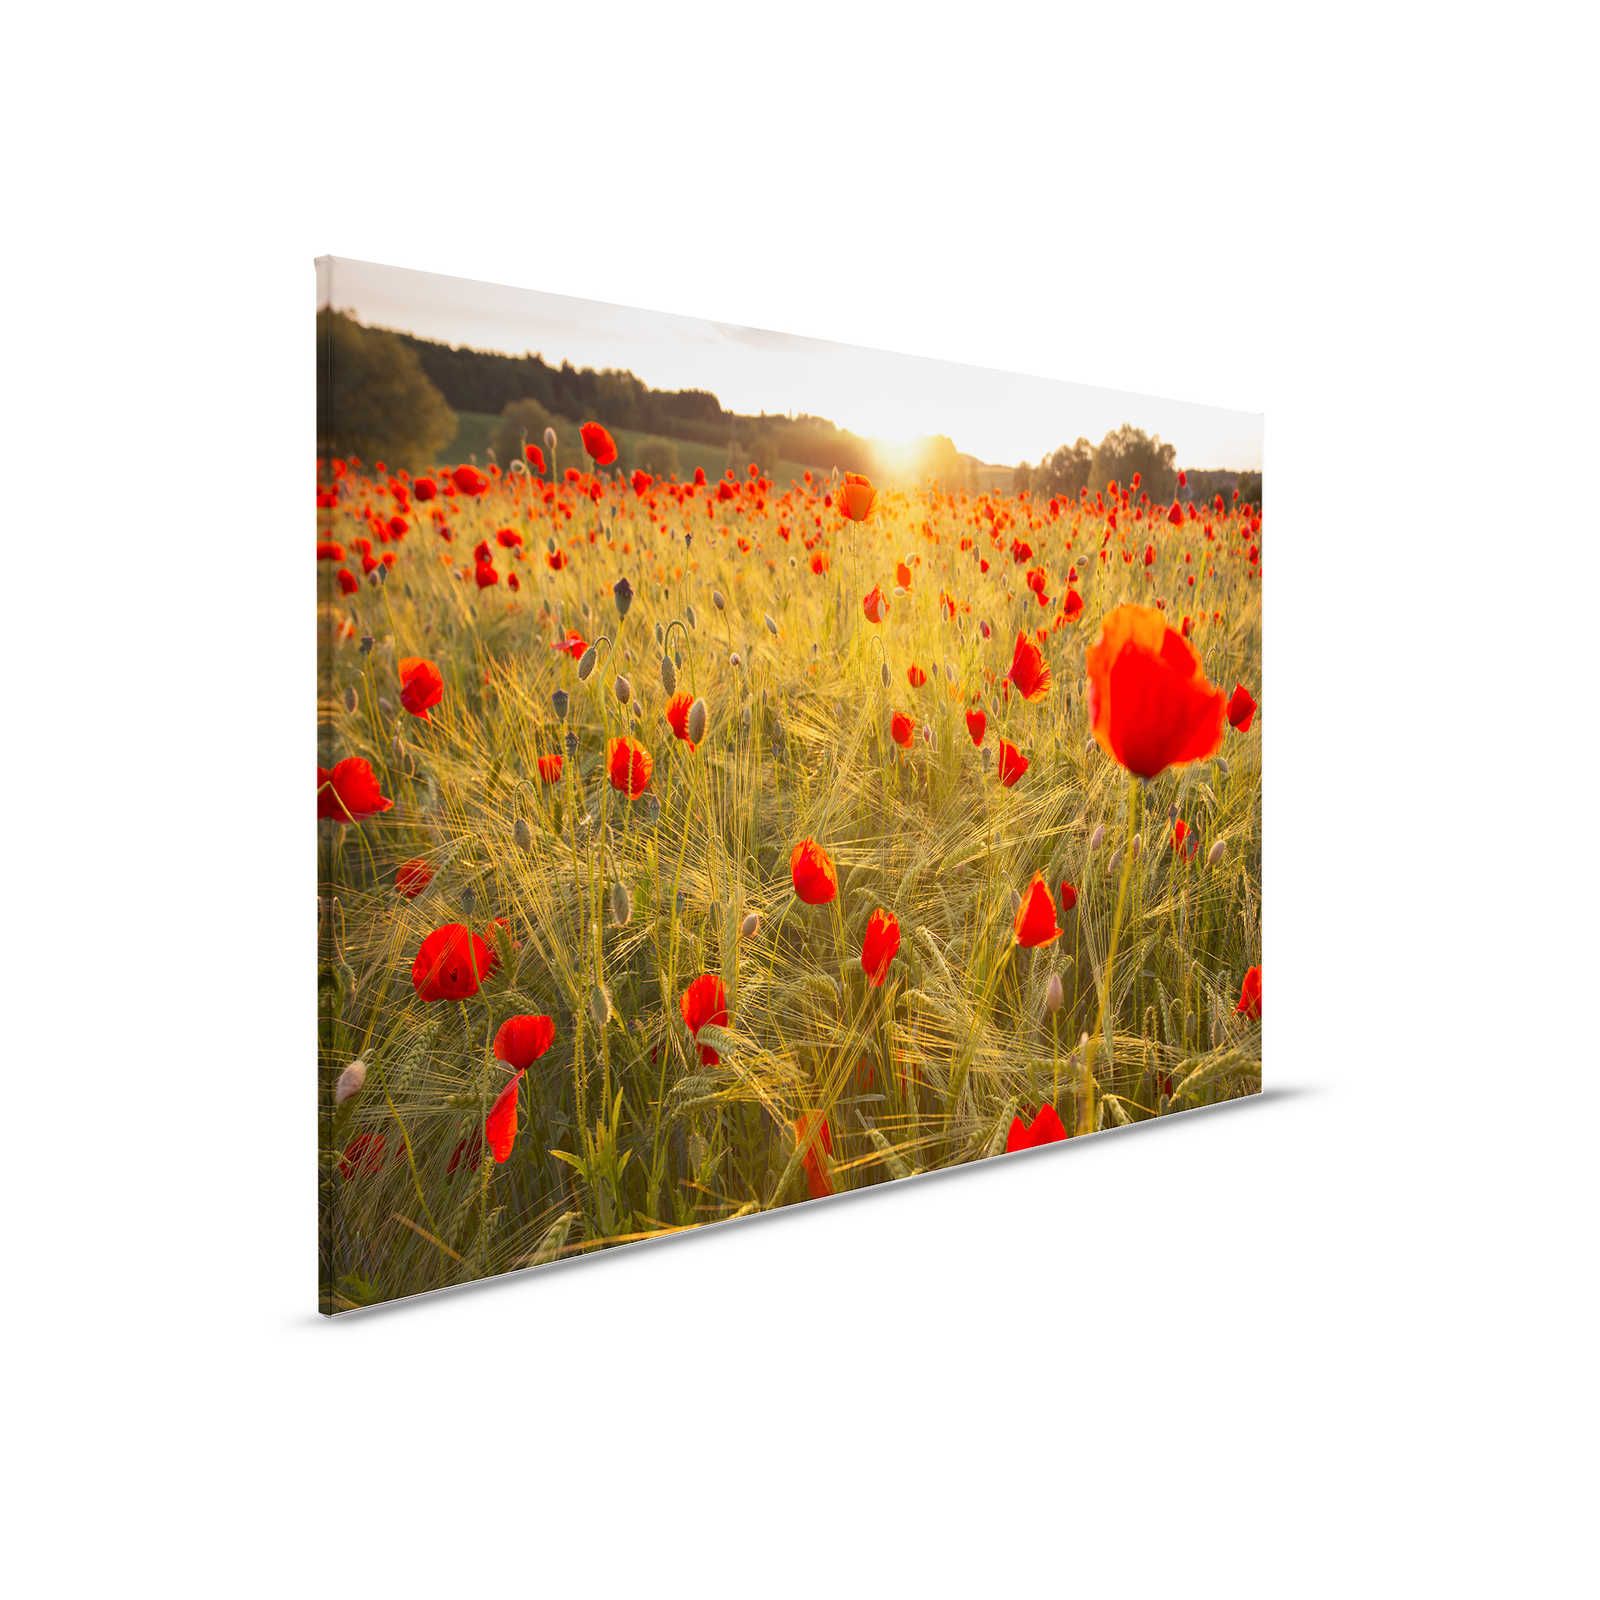         Canvas painting Landscape with poppy meadow - 0,90 m x 0,60 m
    